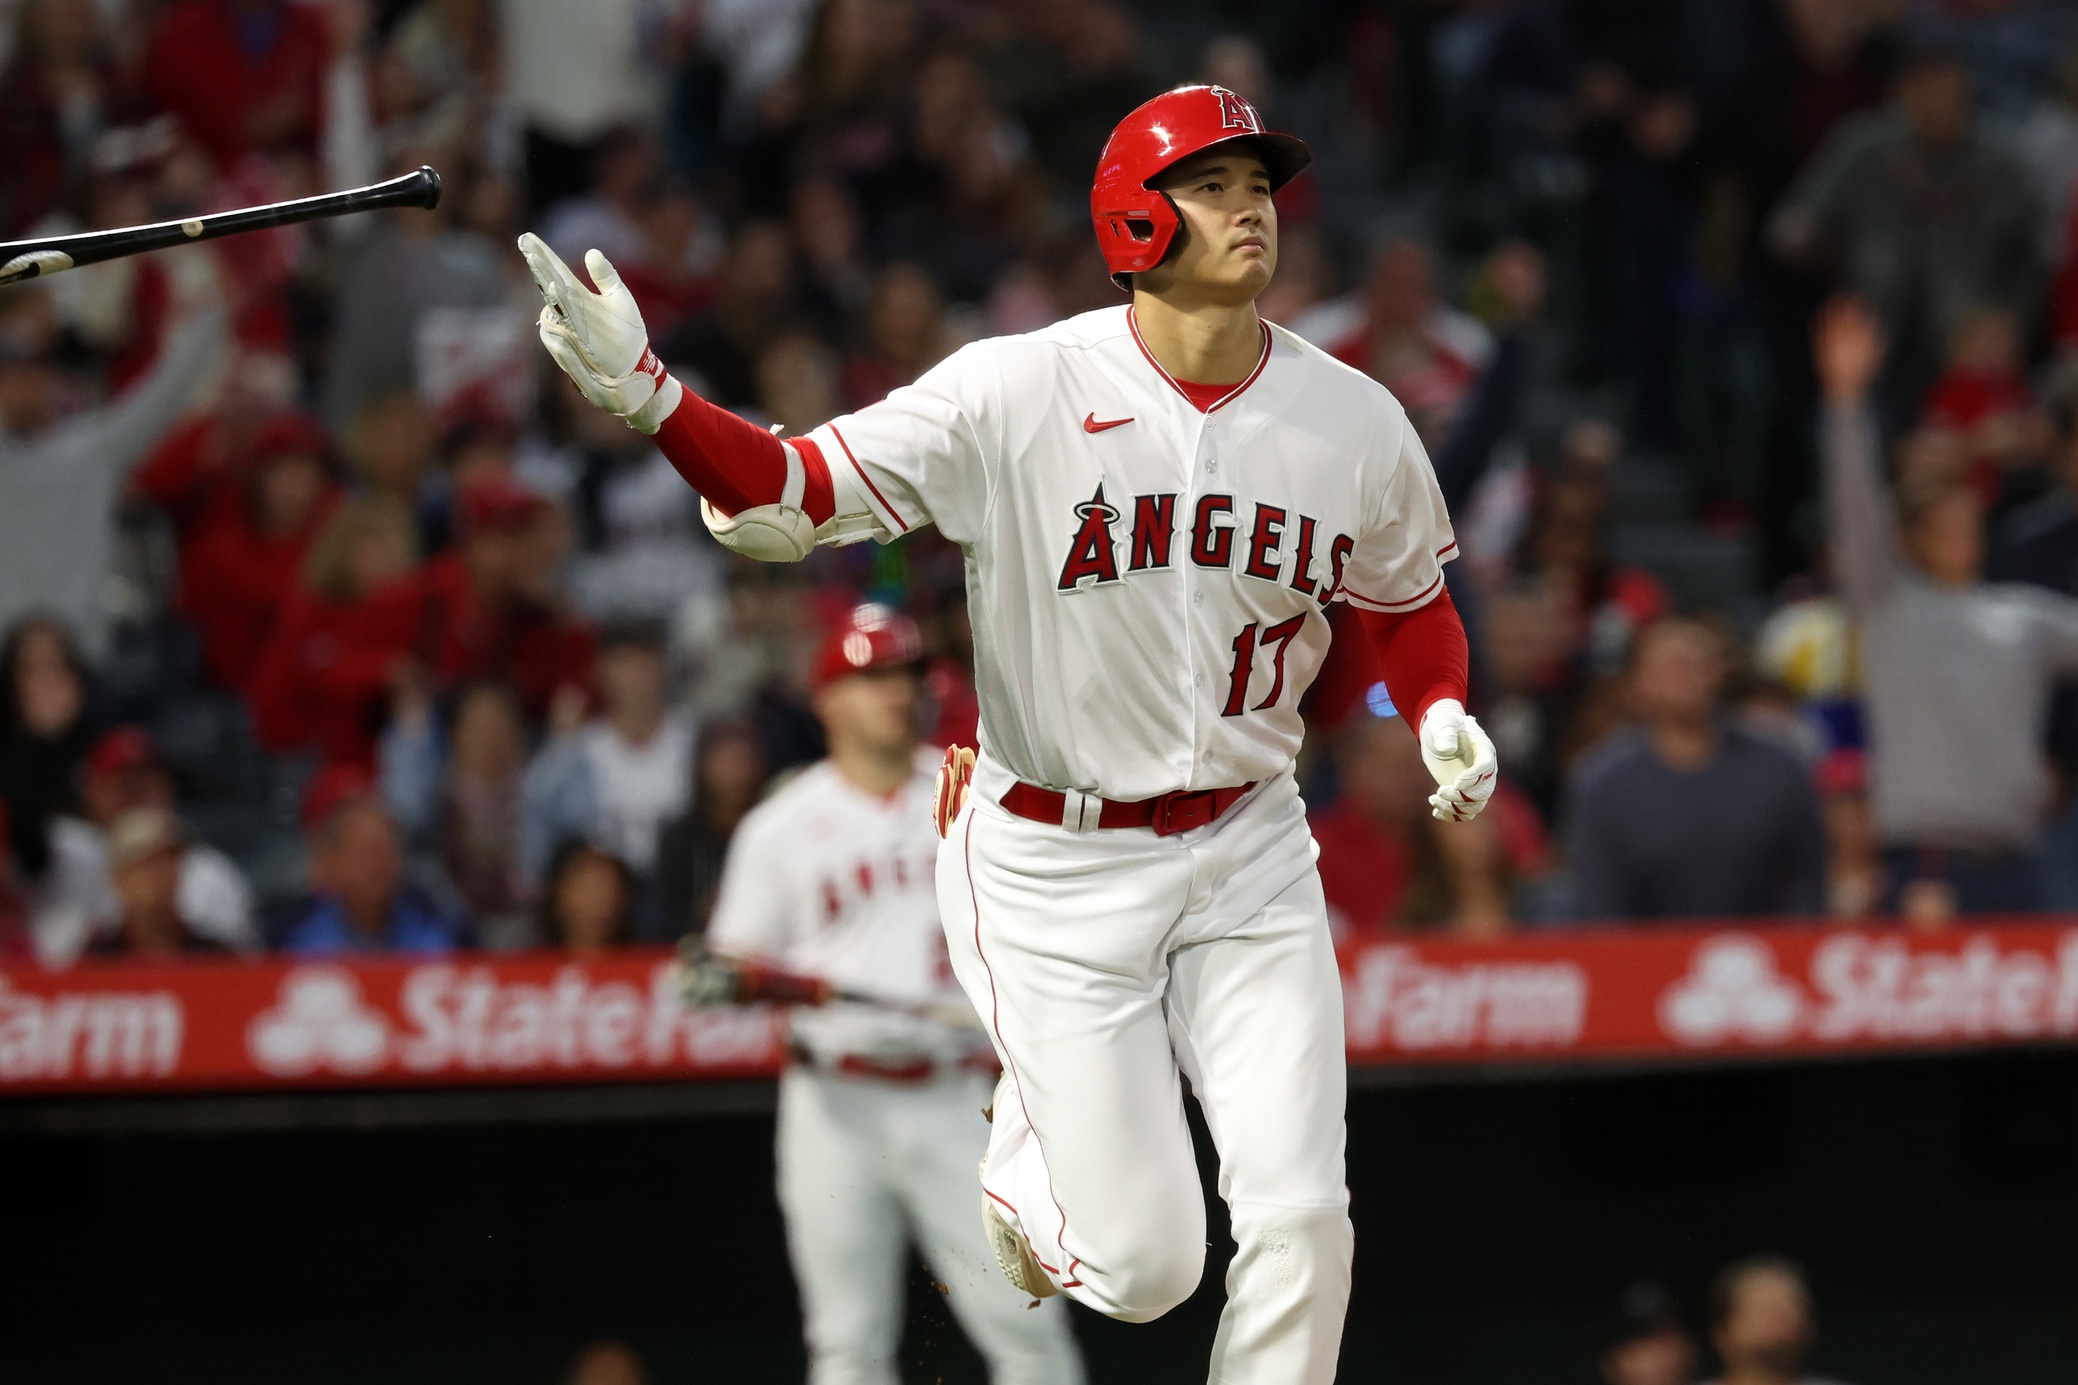 Bells in the Bigs – Dodgers and Angels